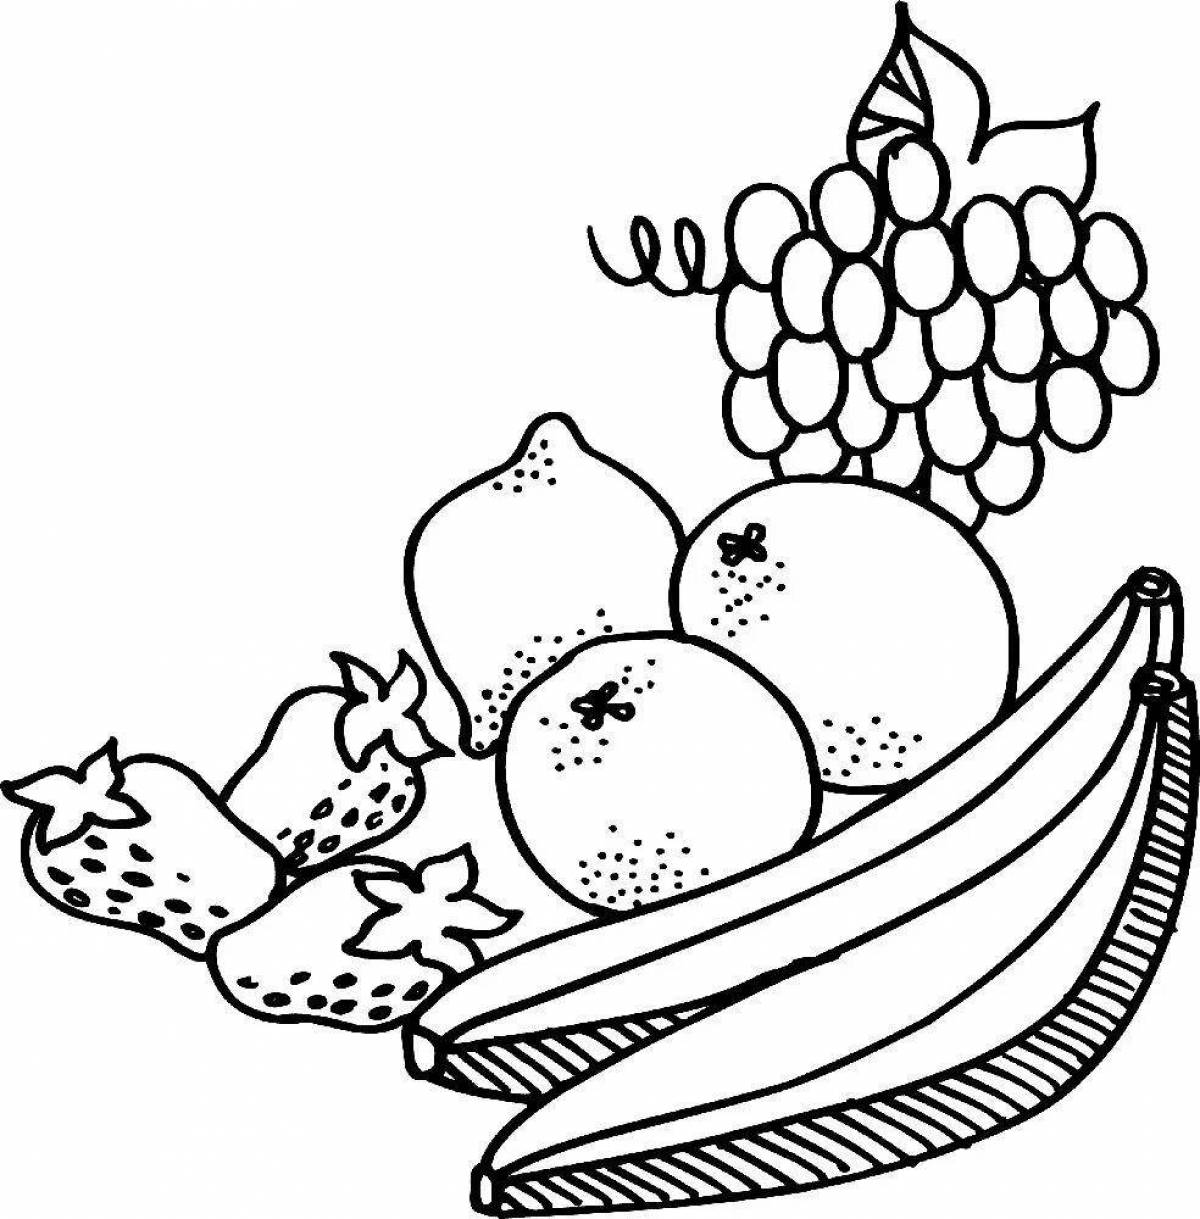 Bright still life with fruit coloring book